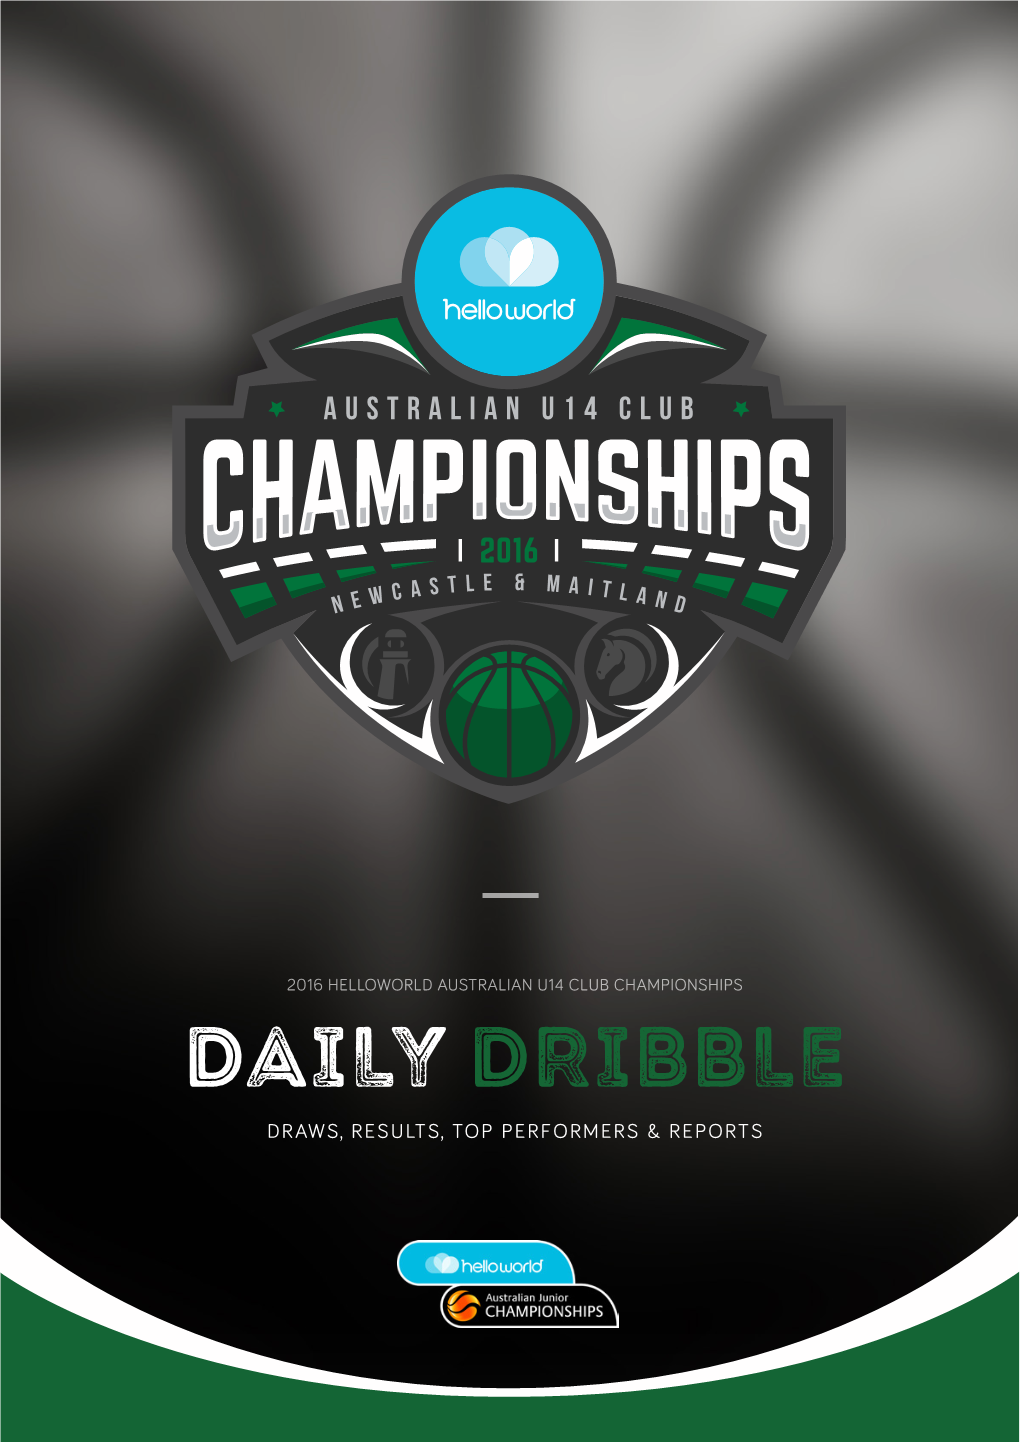 Daily Dribble Draws, Results, Top Performers & Reports Feature Article History Beckons for Defending Champions Sturt Sabres